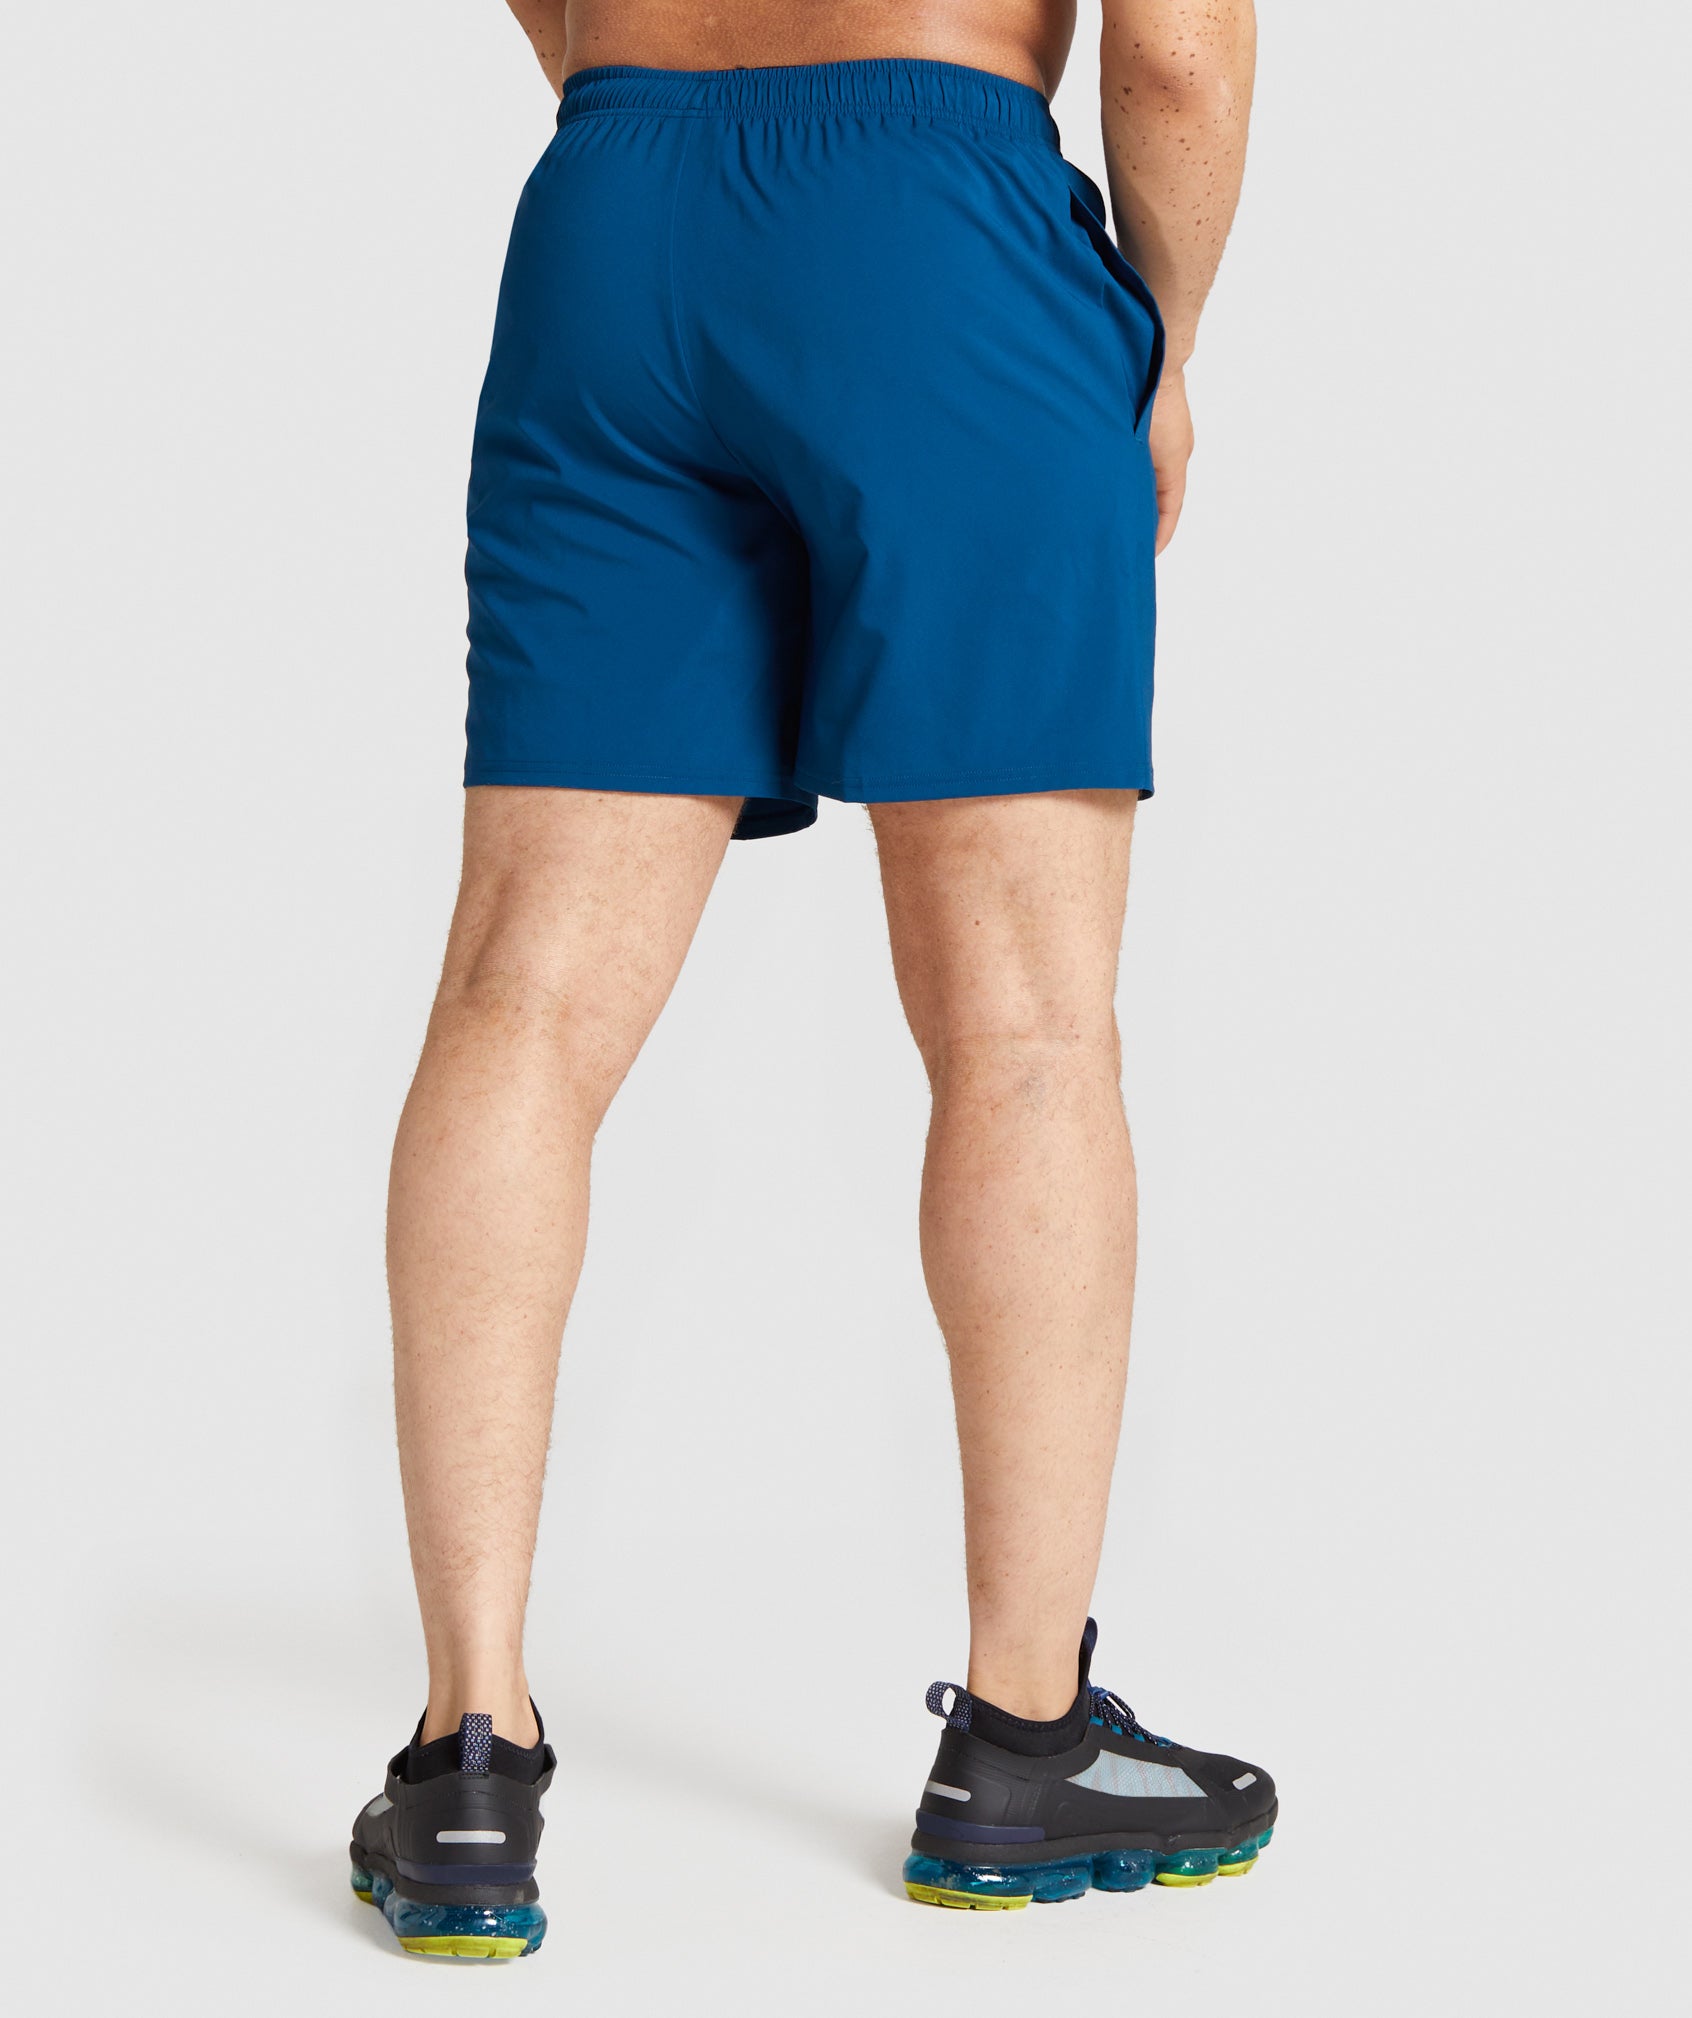 Arrival Shorts in Petrol Blue